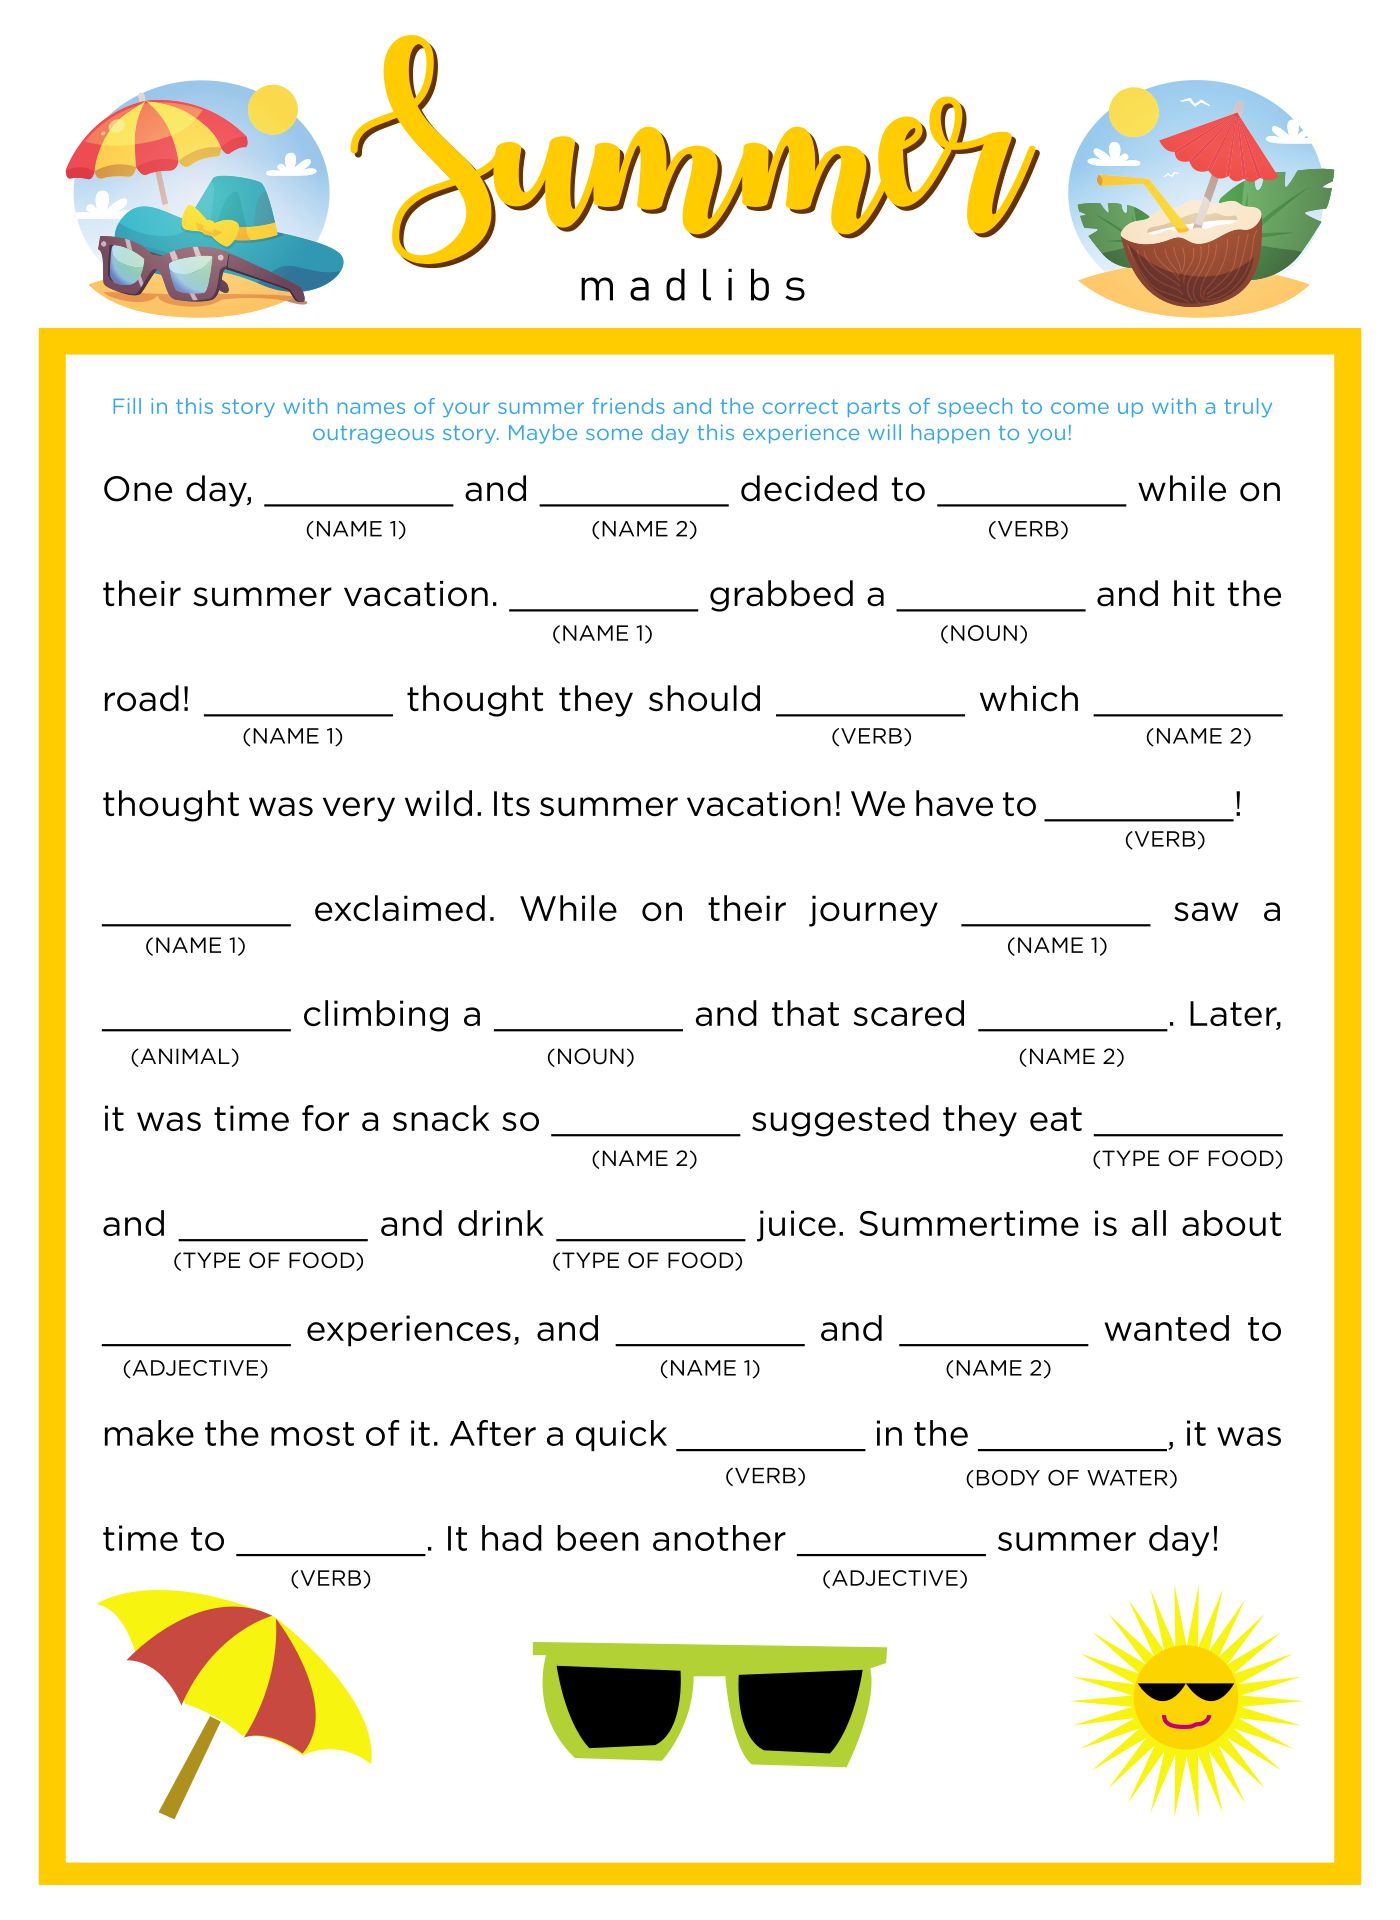 8 Best Images of Camping Mad Libs Printable Free Printable Camping